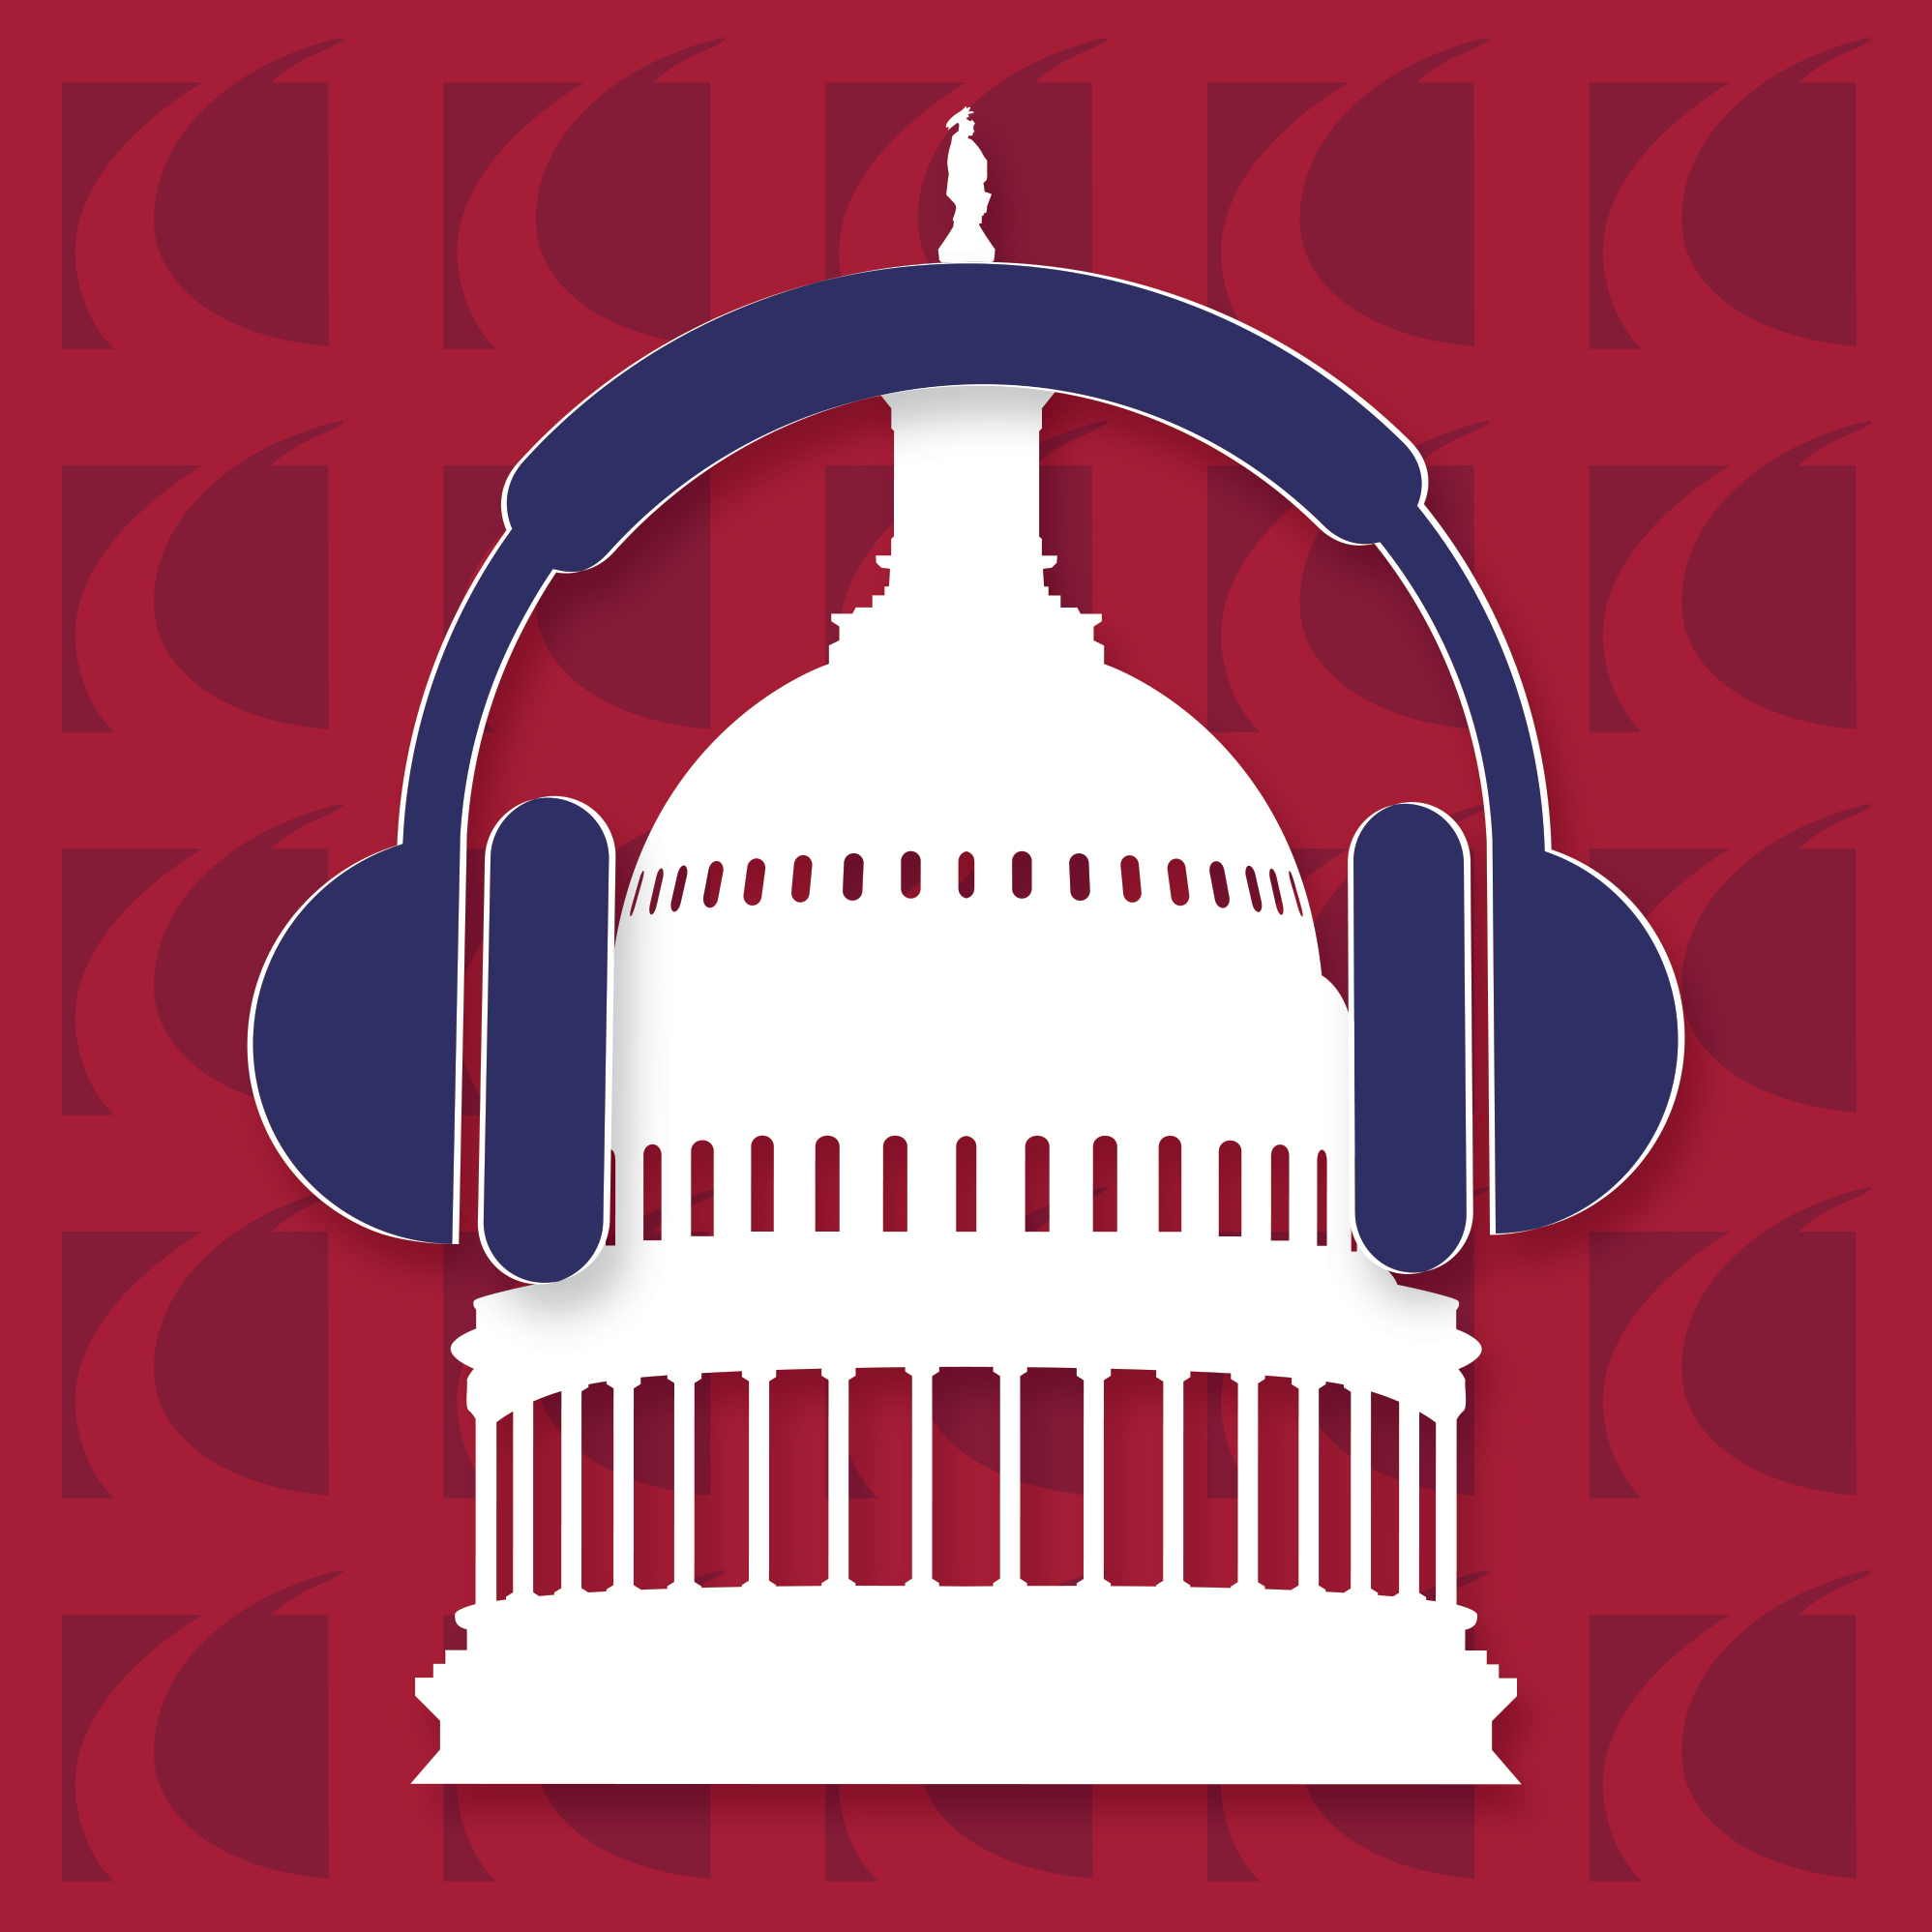 May 26: Fastest 5 Minutes, The Podcast Gov’t Contractors Can’t Do Without - Crowell & Moring LLP